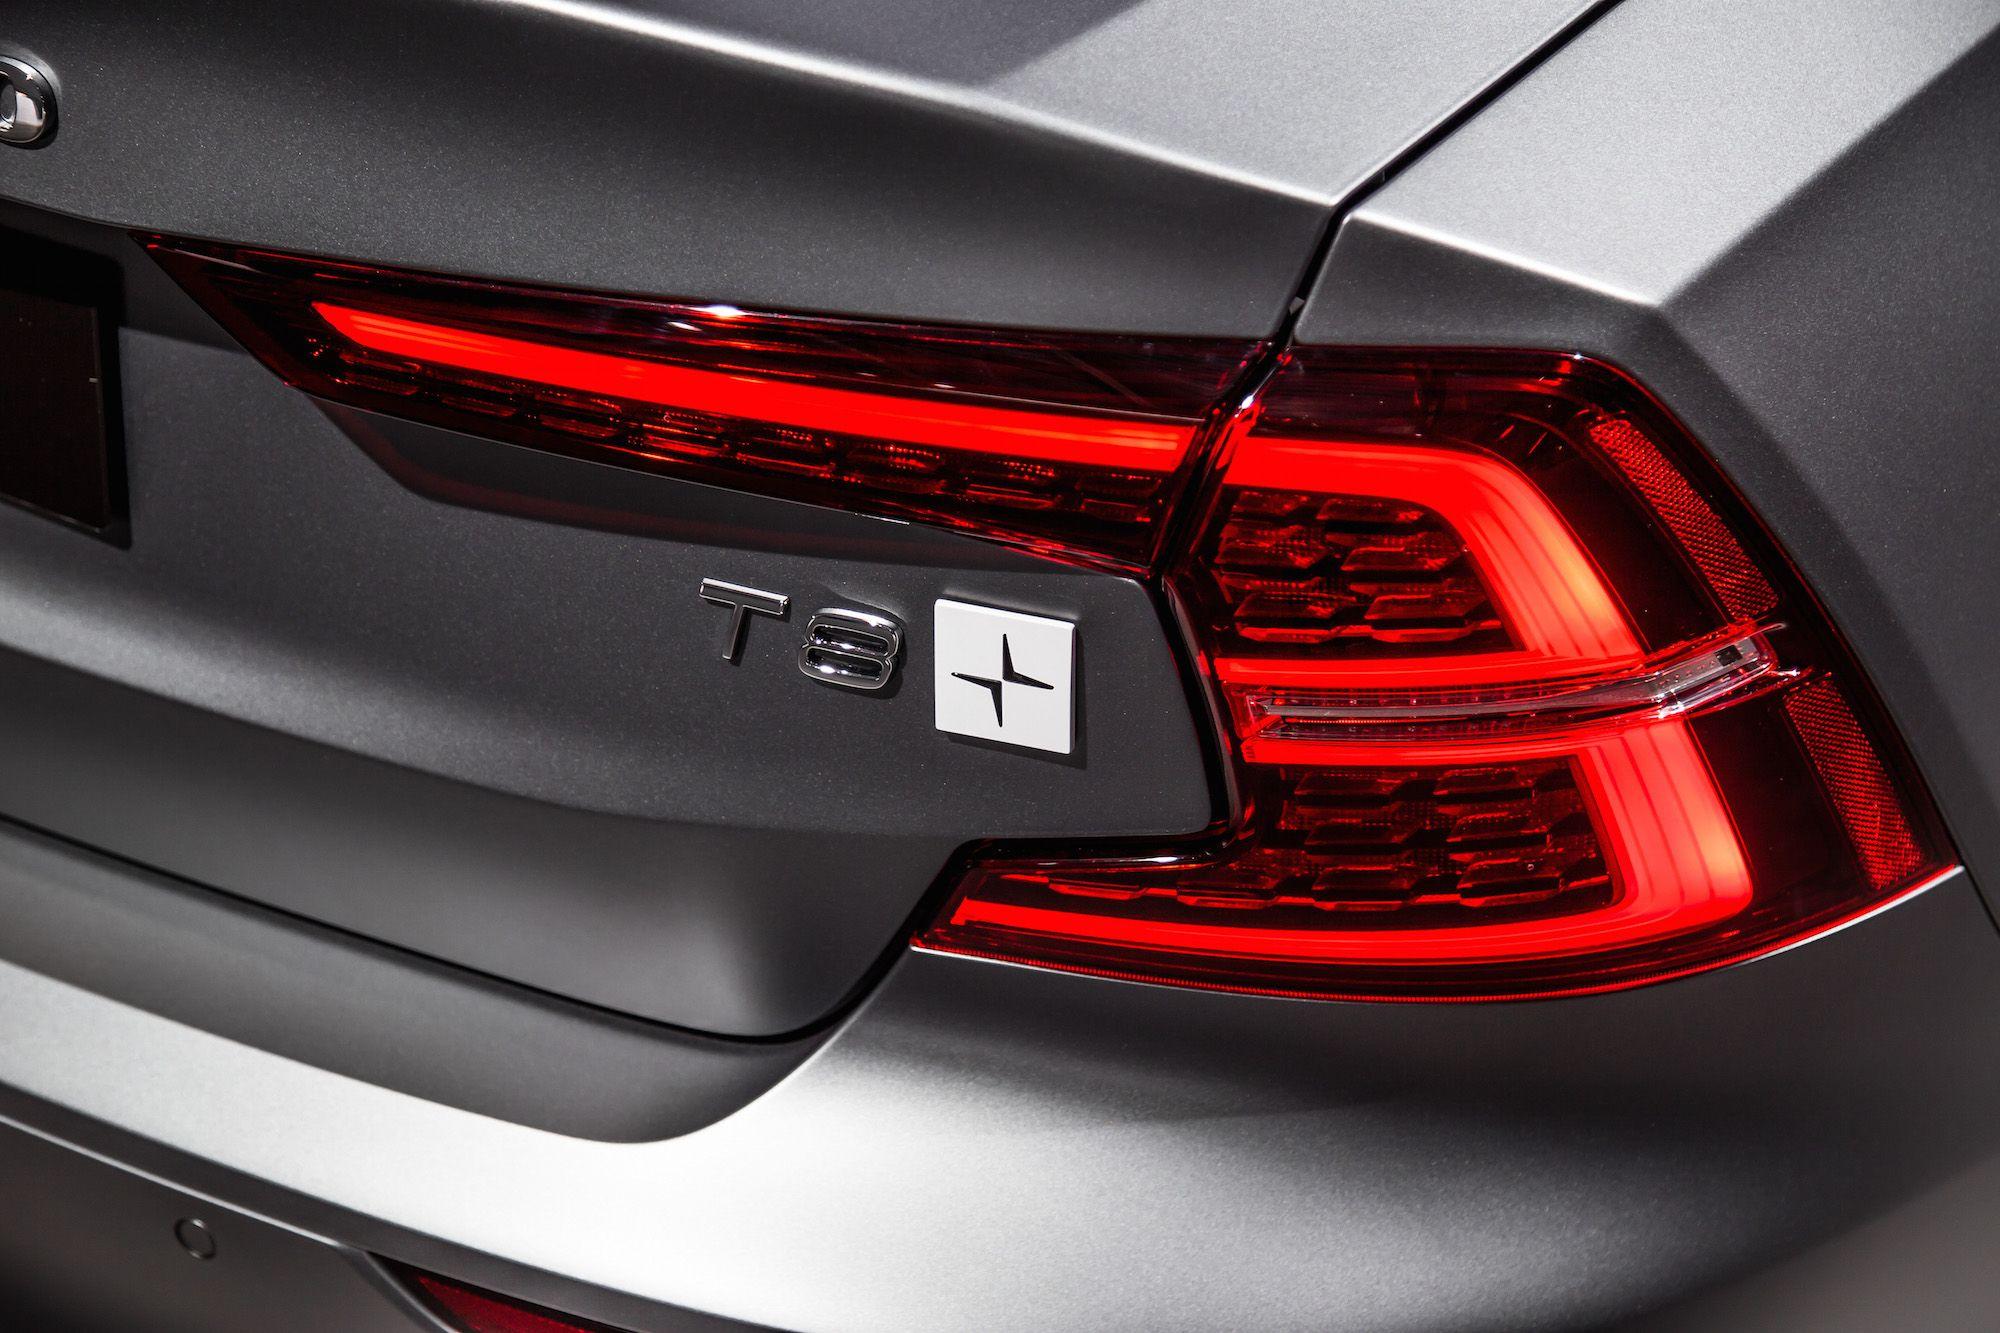 2019 Volvo Logo - First Look: 2019 Volvo S60 | CAR